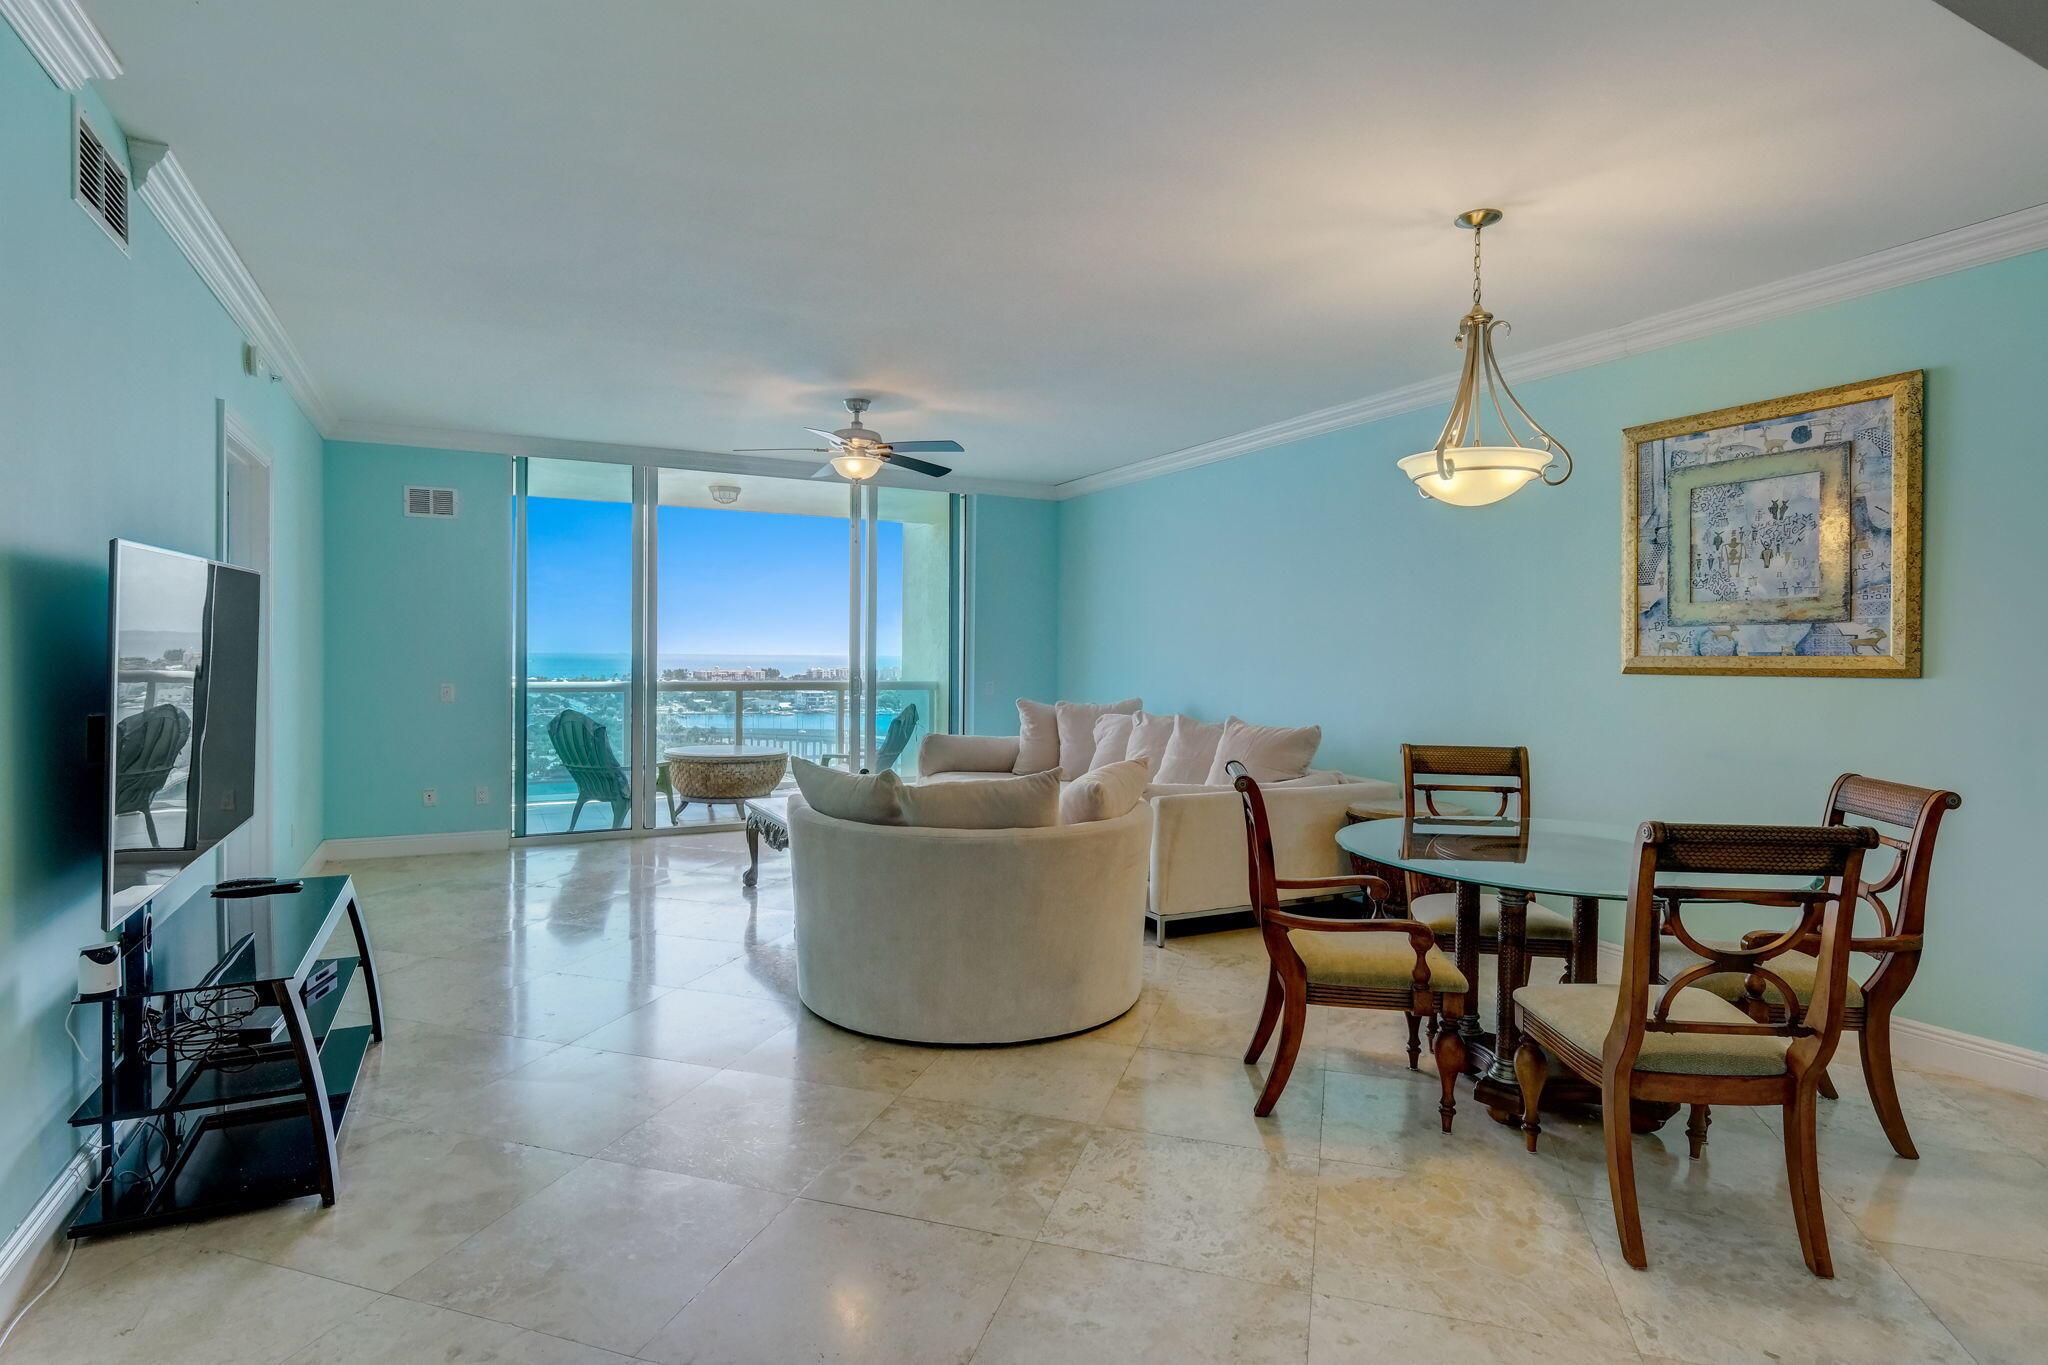 MOTIVATED SELLER!!  Spectacular intracoastal/ocean views from this 18th floor 2bd 2ba plus large den resident in the preferred ocean tower. Enjoy the morning sunrise, ocean life and the pristine blue water while sitting on your private balcony enjoying your morning coffee. This 09 model has impact 9ft floor to ceiling sliders and windows, crown moulding, travertine floors through-out (no carpet), contemporary kitchen with new counters and backsplash, master bathroom has a jacuzzi tub with a separate shower and 2 walk-in closets. MG offers a newly renovated pool deck with fireplace/bar, grills, whirlpool, glass wall that looks toward Palm Beach Island, sauna, steam room, fitness center, 4 pickleball courts, bocce ball, tennis, billiard room, card room and a